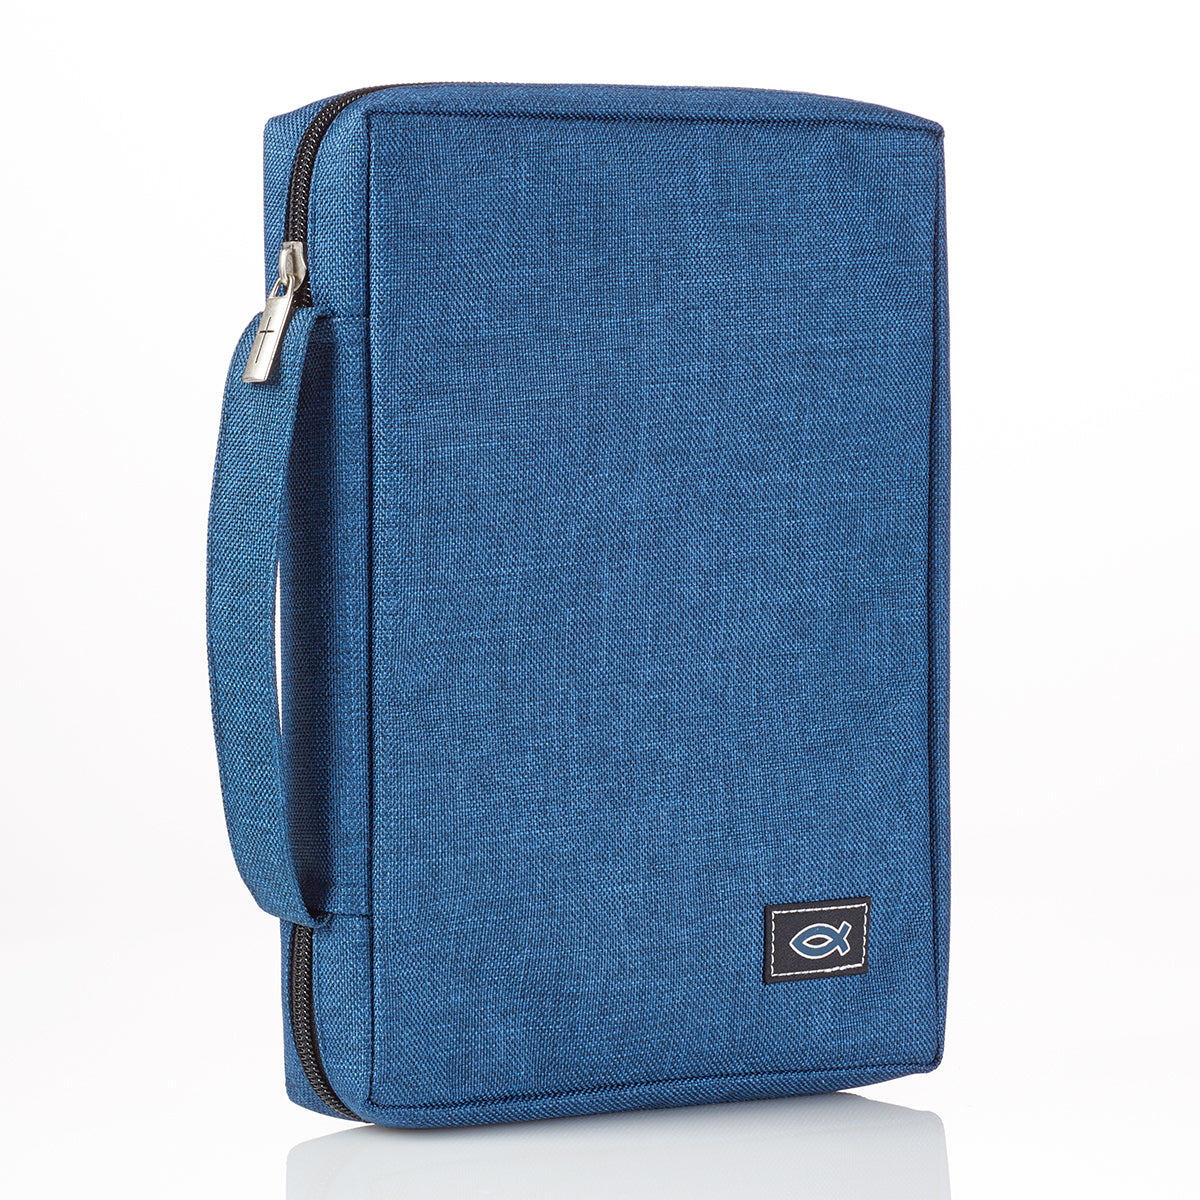 Blue Poly-canvas Bible Cover with Ichthus Fish Badge - The Christian Gift Company